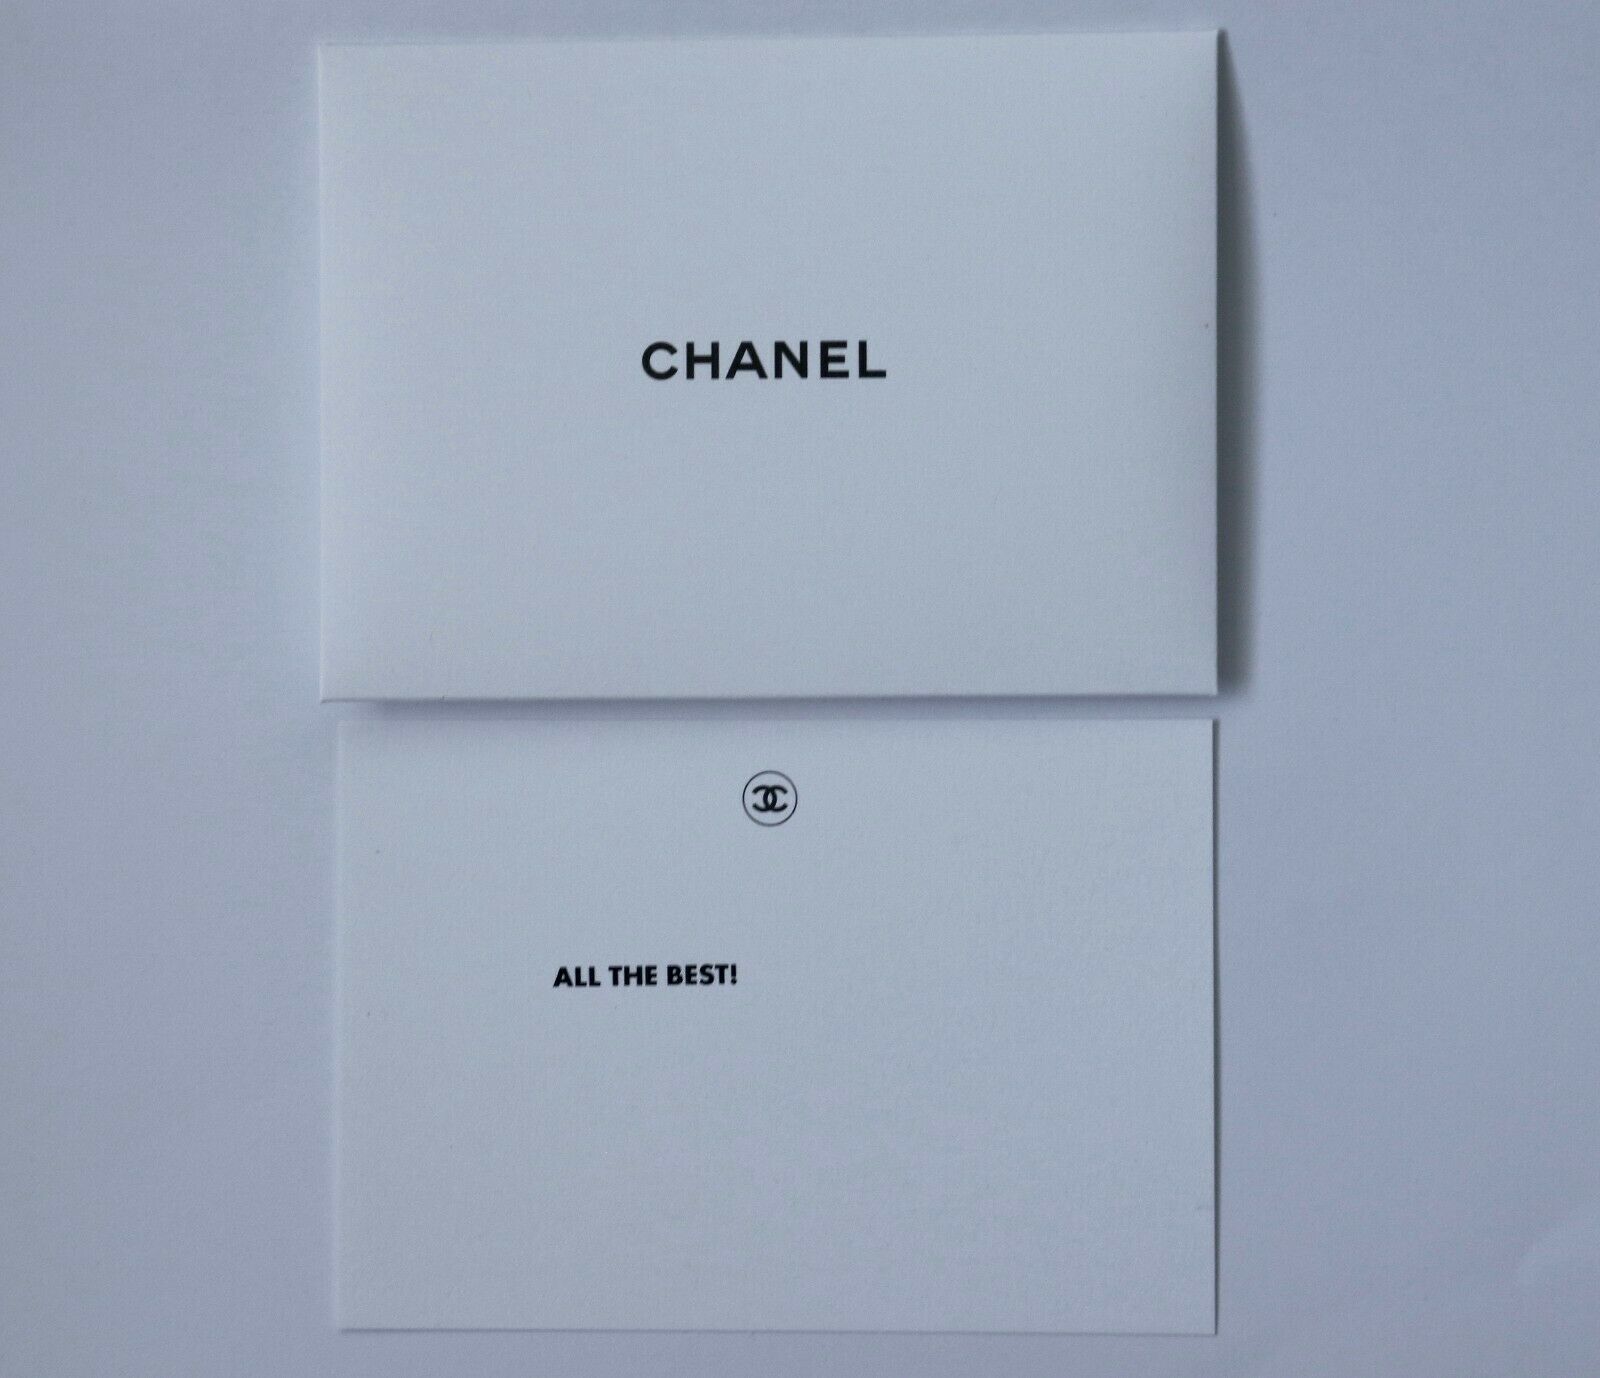 Authentic CHANEL Blank Greeting  Card & Envelope ALL THE BEST 13cm - $9.95